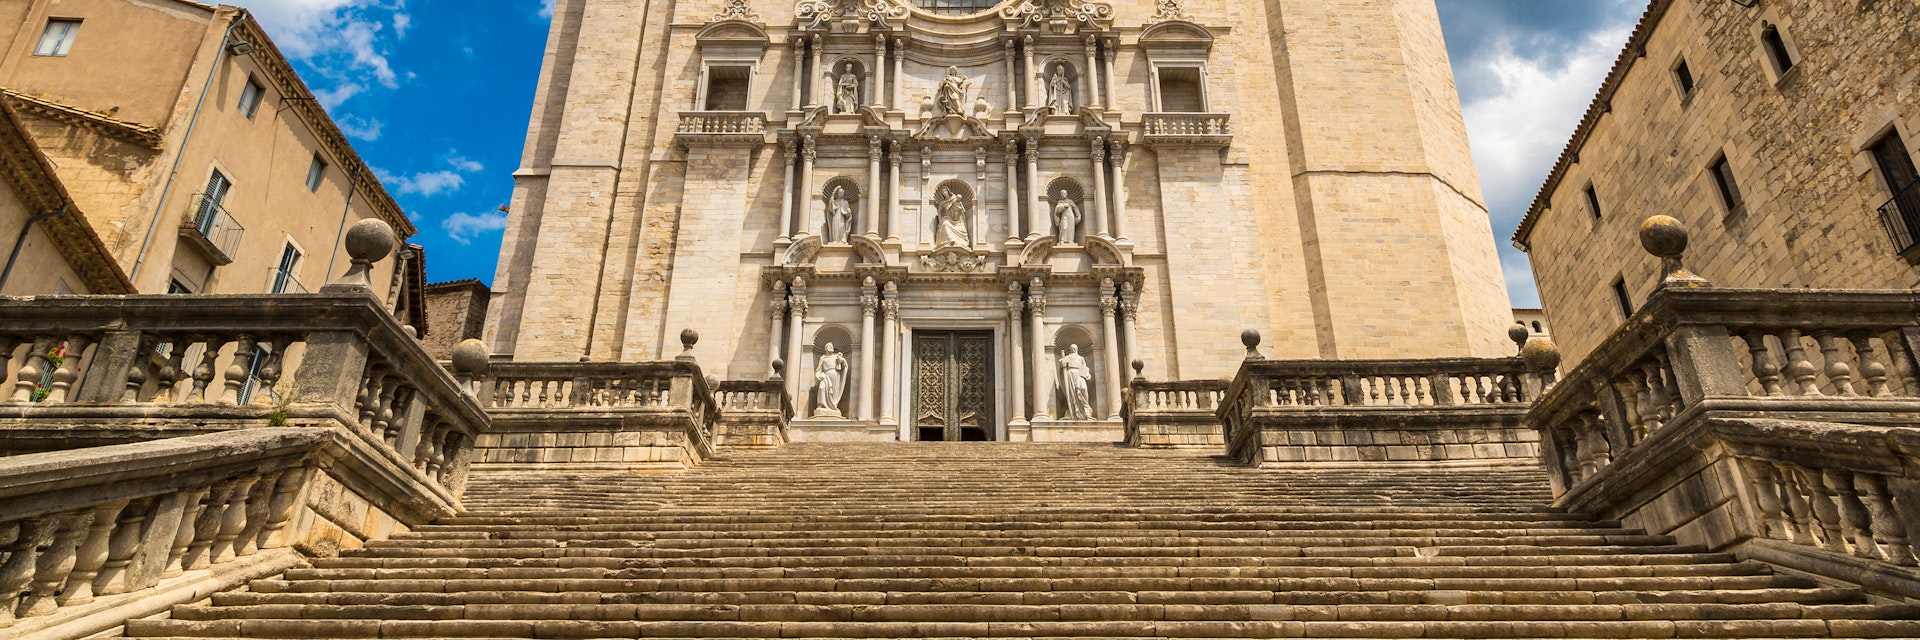 Girona cathedral facade with statues in a beautiful summer day, Catalonia, Spain.